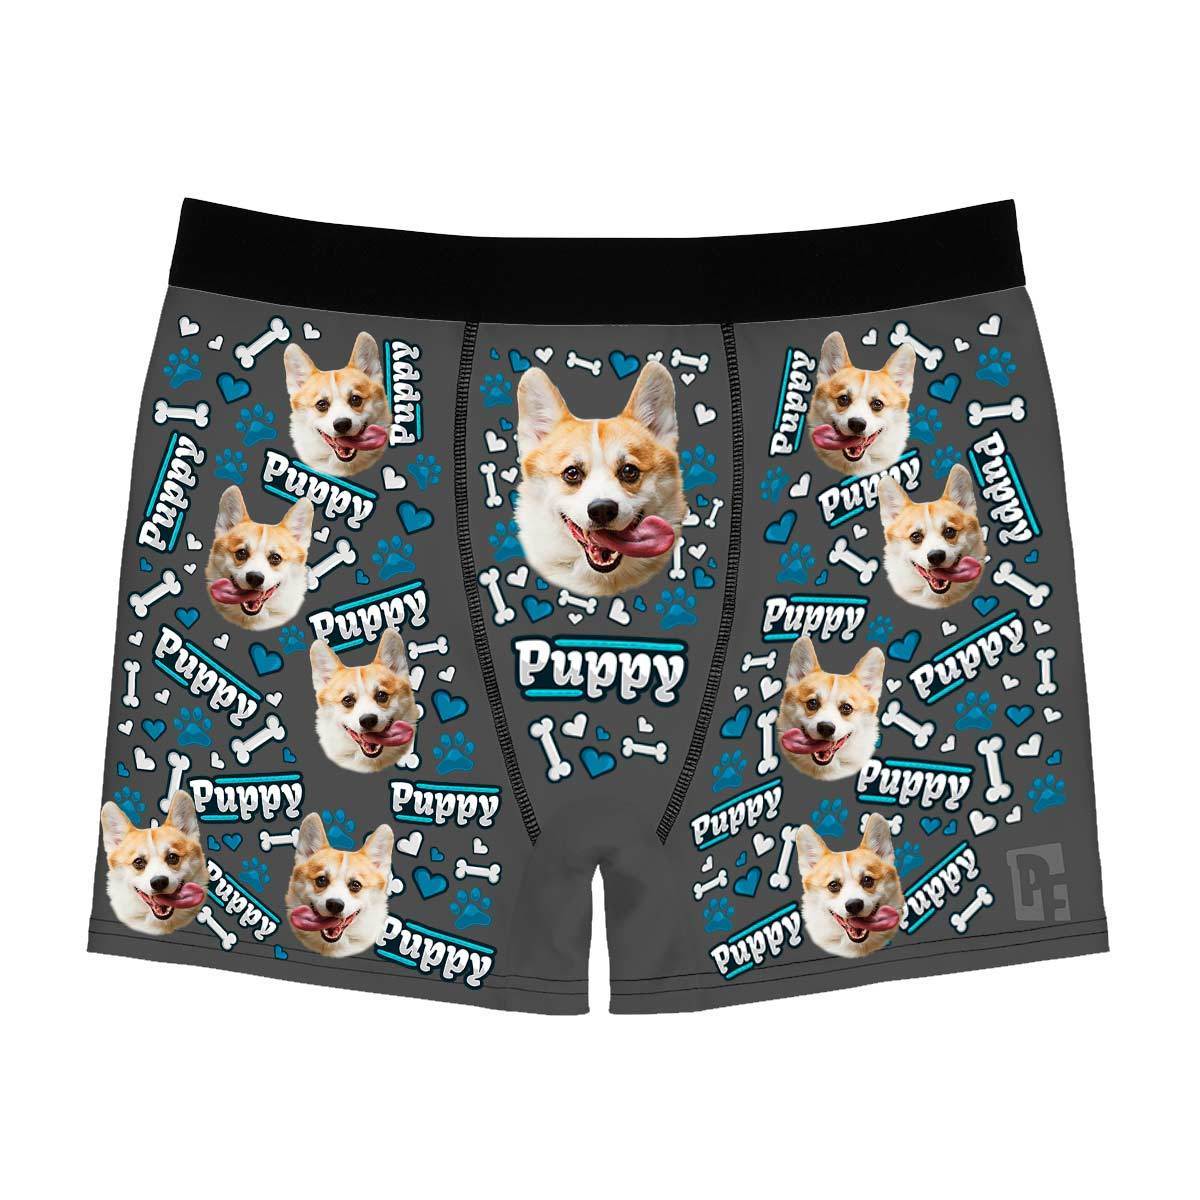 Dark Puppy men's boxer briefs personalized with photo printed on them